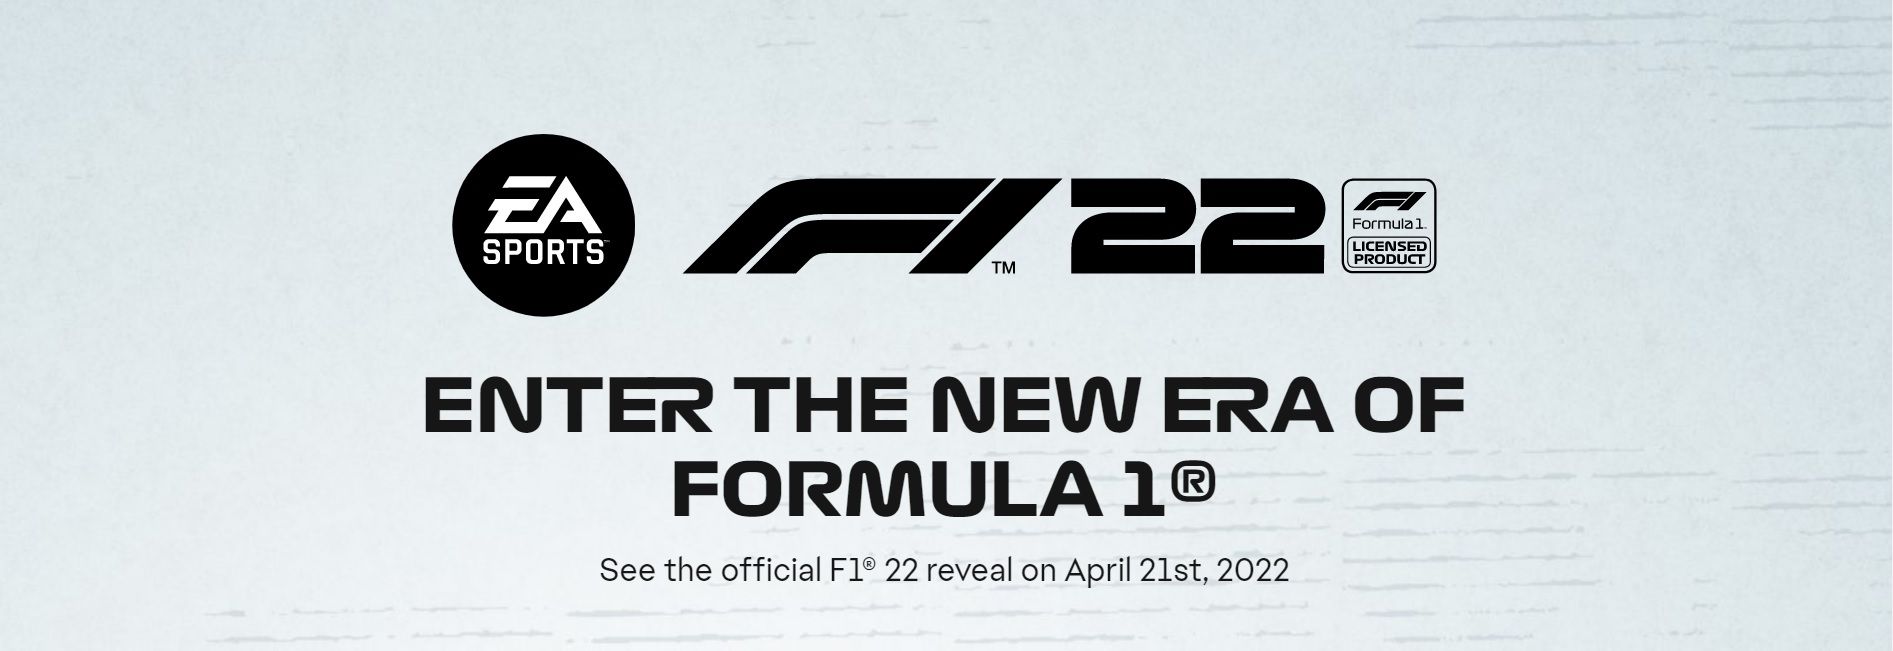 F1 22 world reveal countdown timer